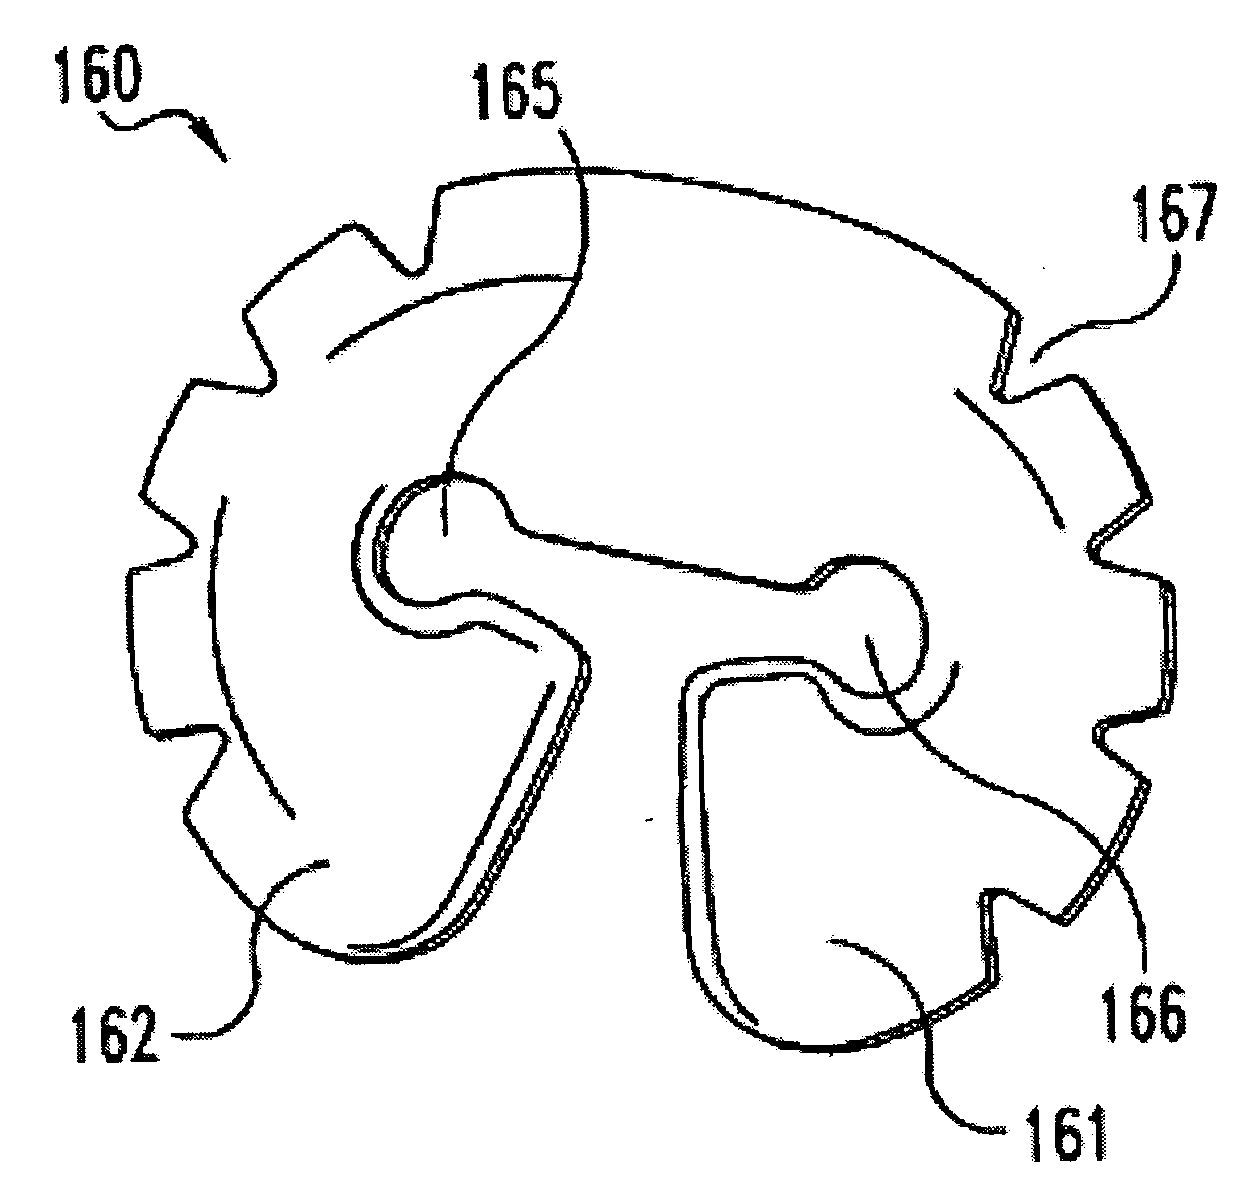 Composite spinal nucleus implant with water absorption and swelling capabilities